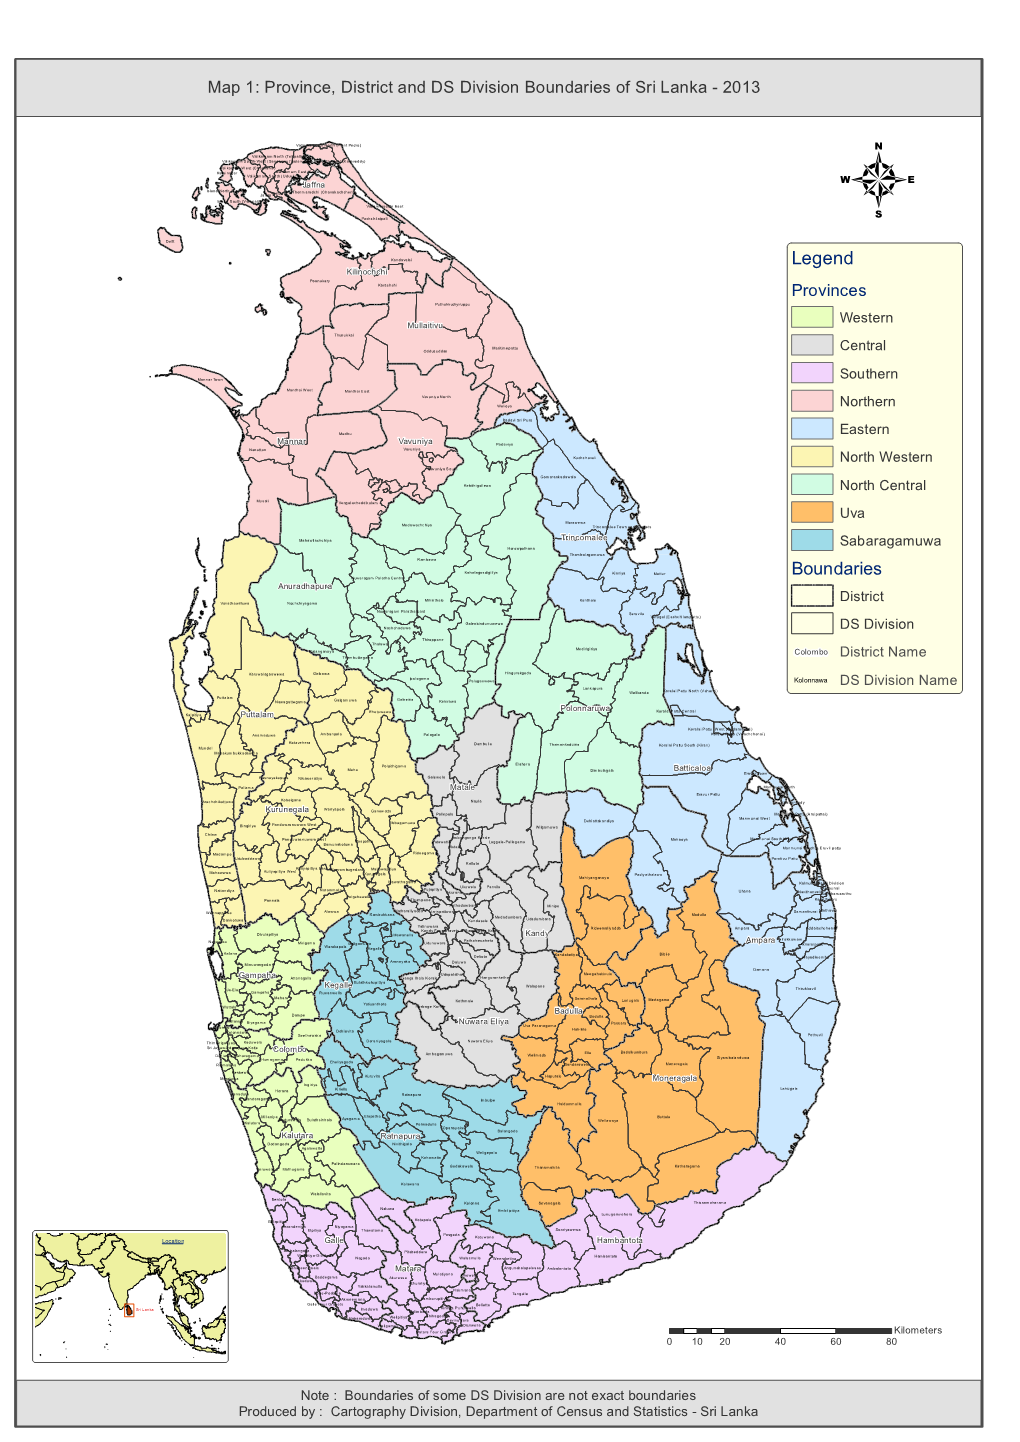 Map 1: Province, District and DS Division Boundaries of Sri Lanka - 2013